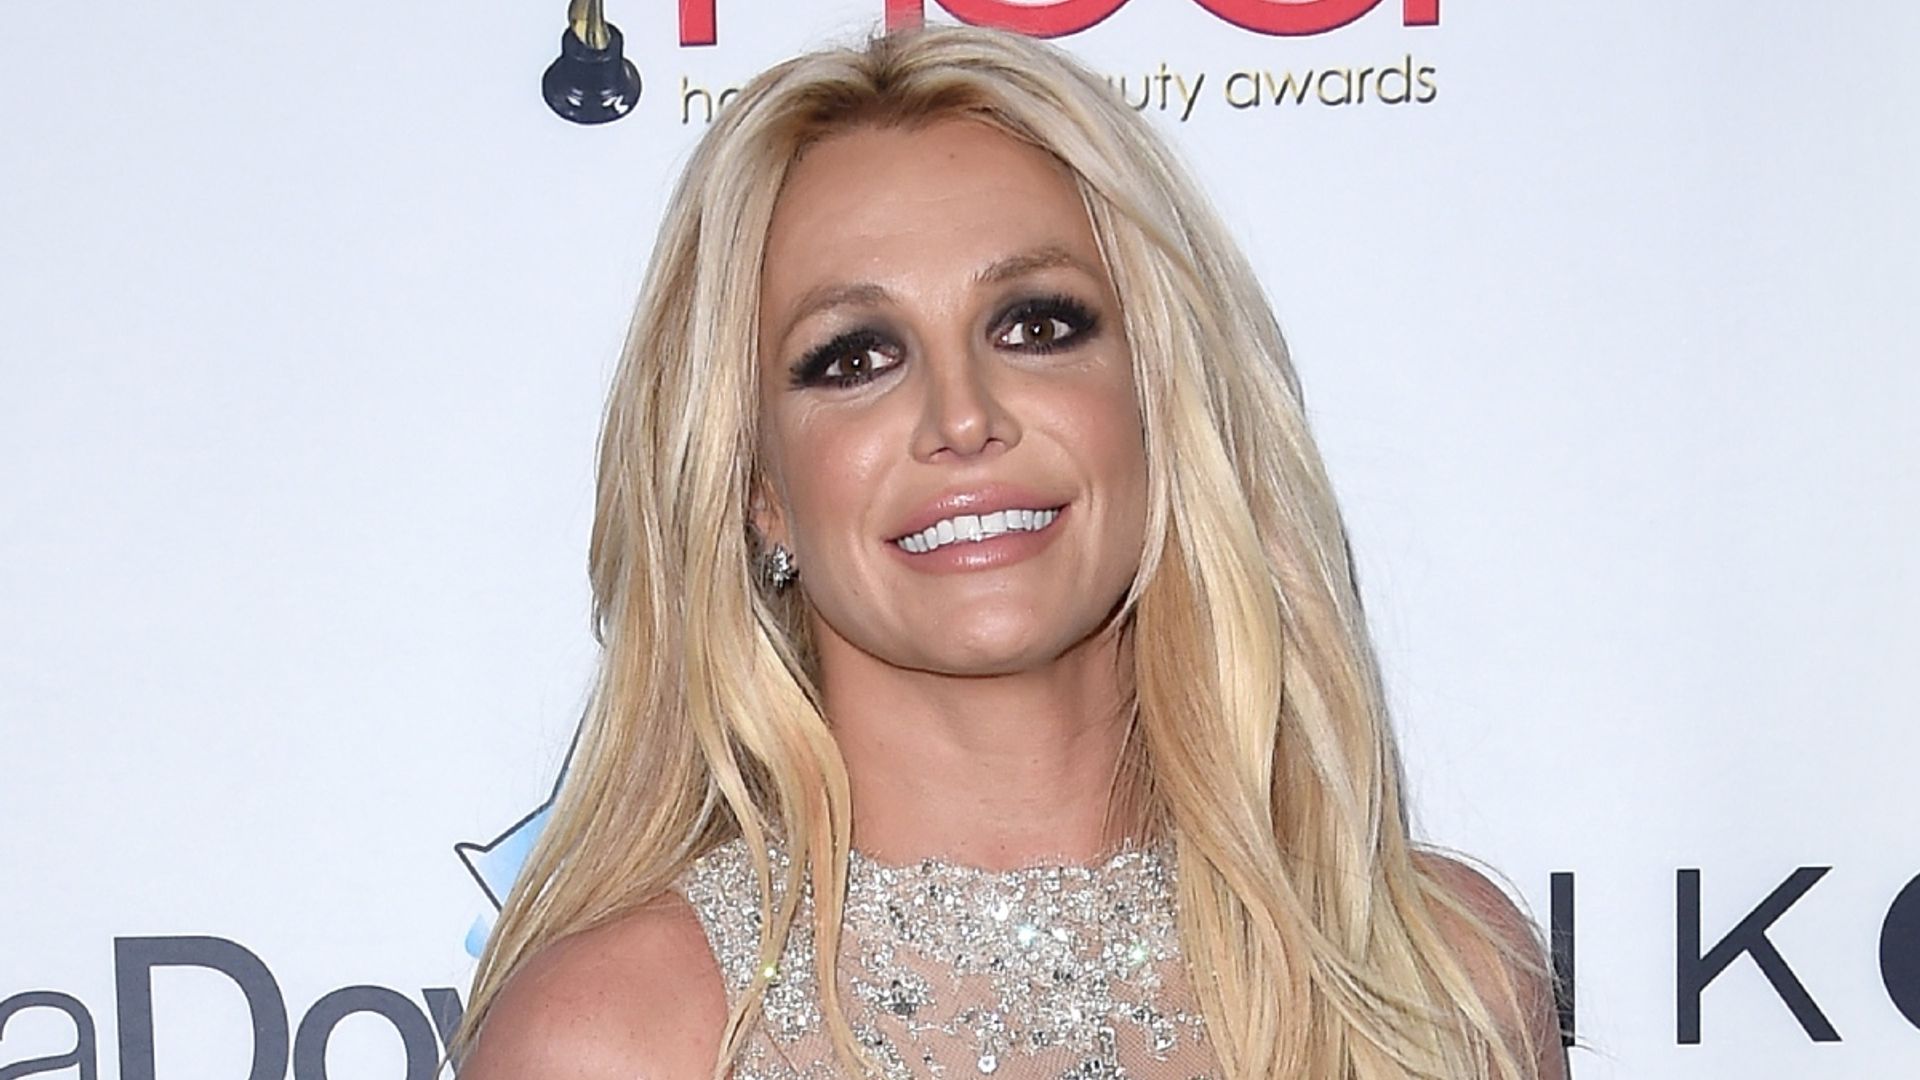 Britney Spears' revealing picture has fans asking questions | HELLO!